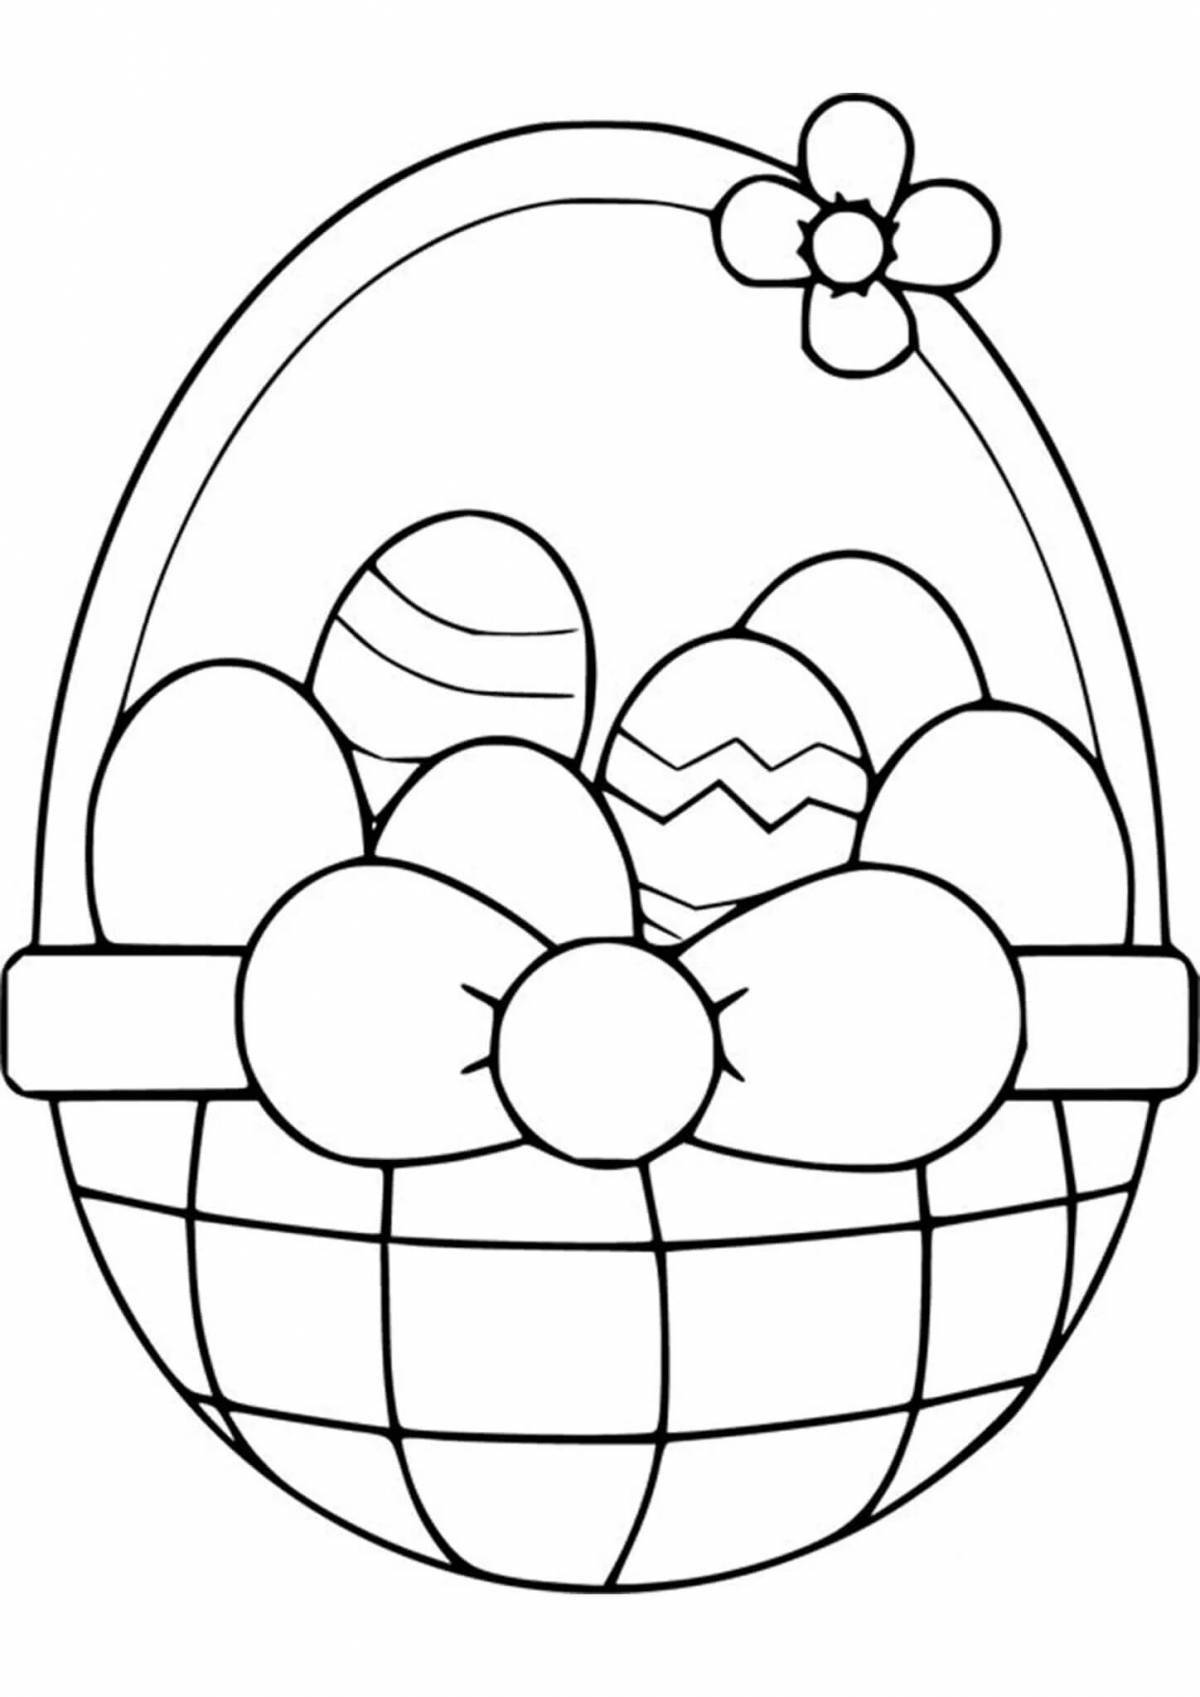 Glitter chicken egg coloring page